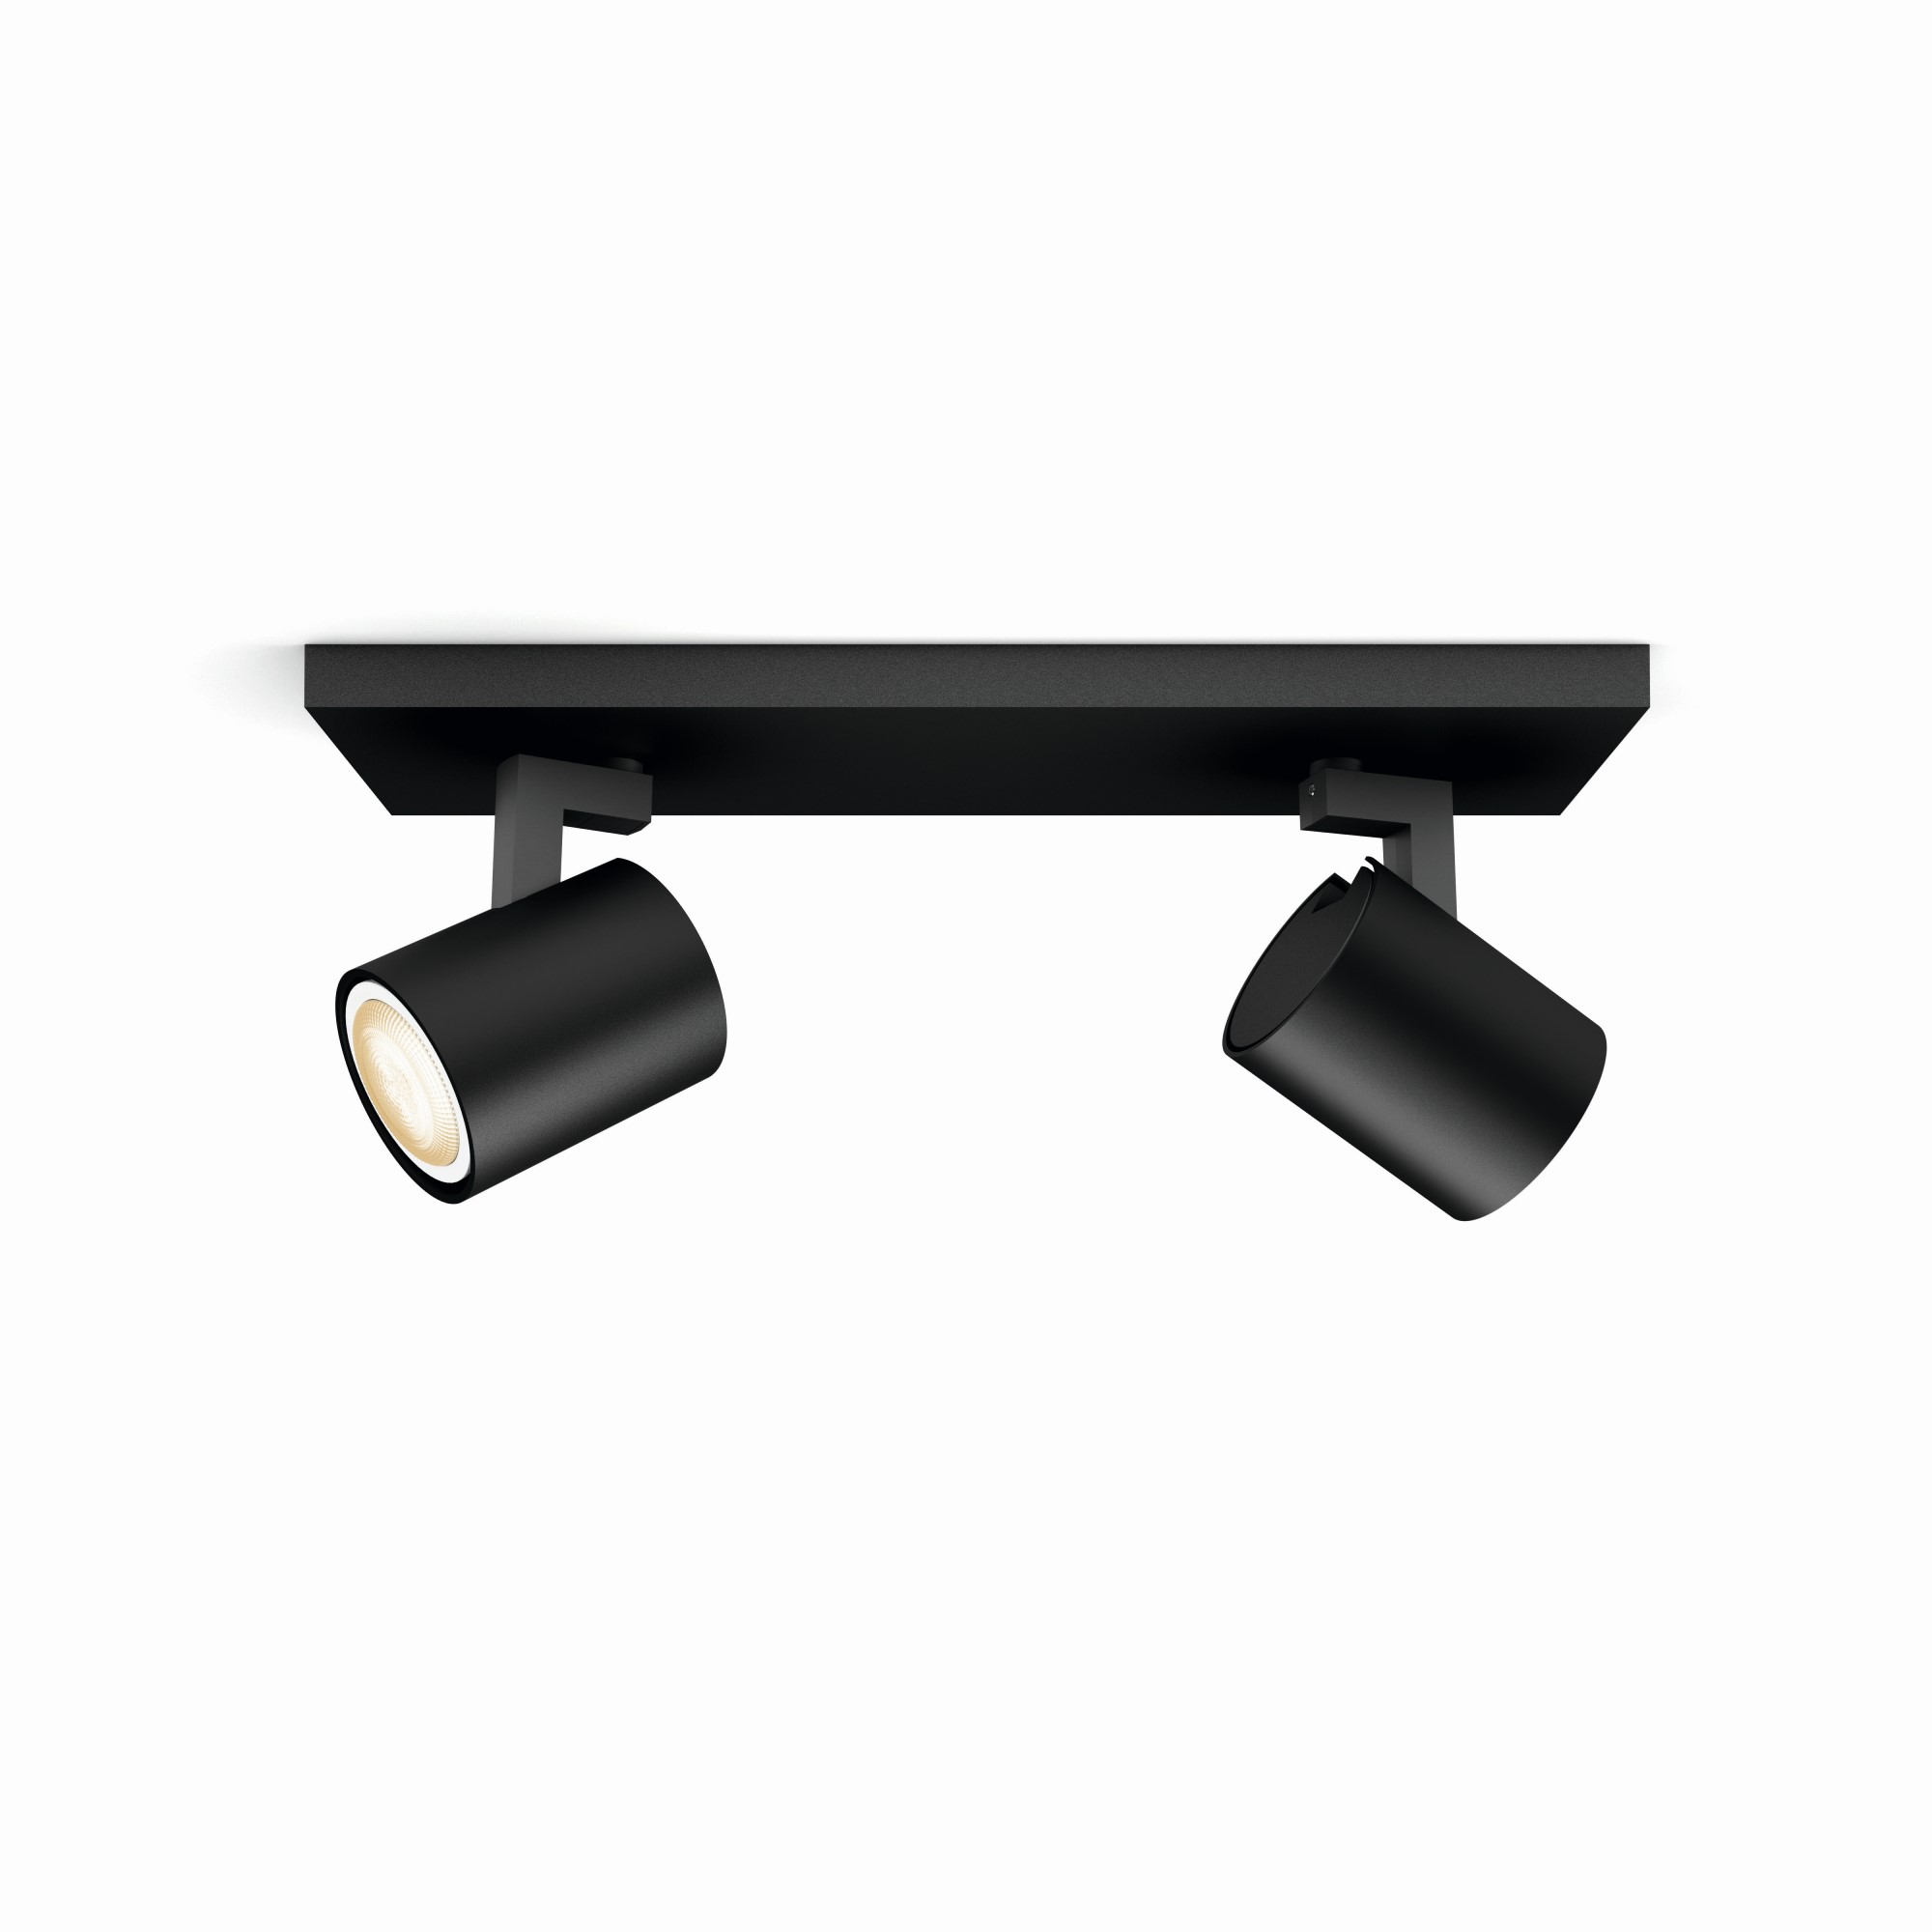 Philips Hue White Ambiance Runner LED Spot Light double-flamed black 2x 350lm incl. Dimmer Switch